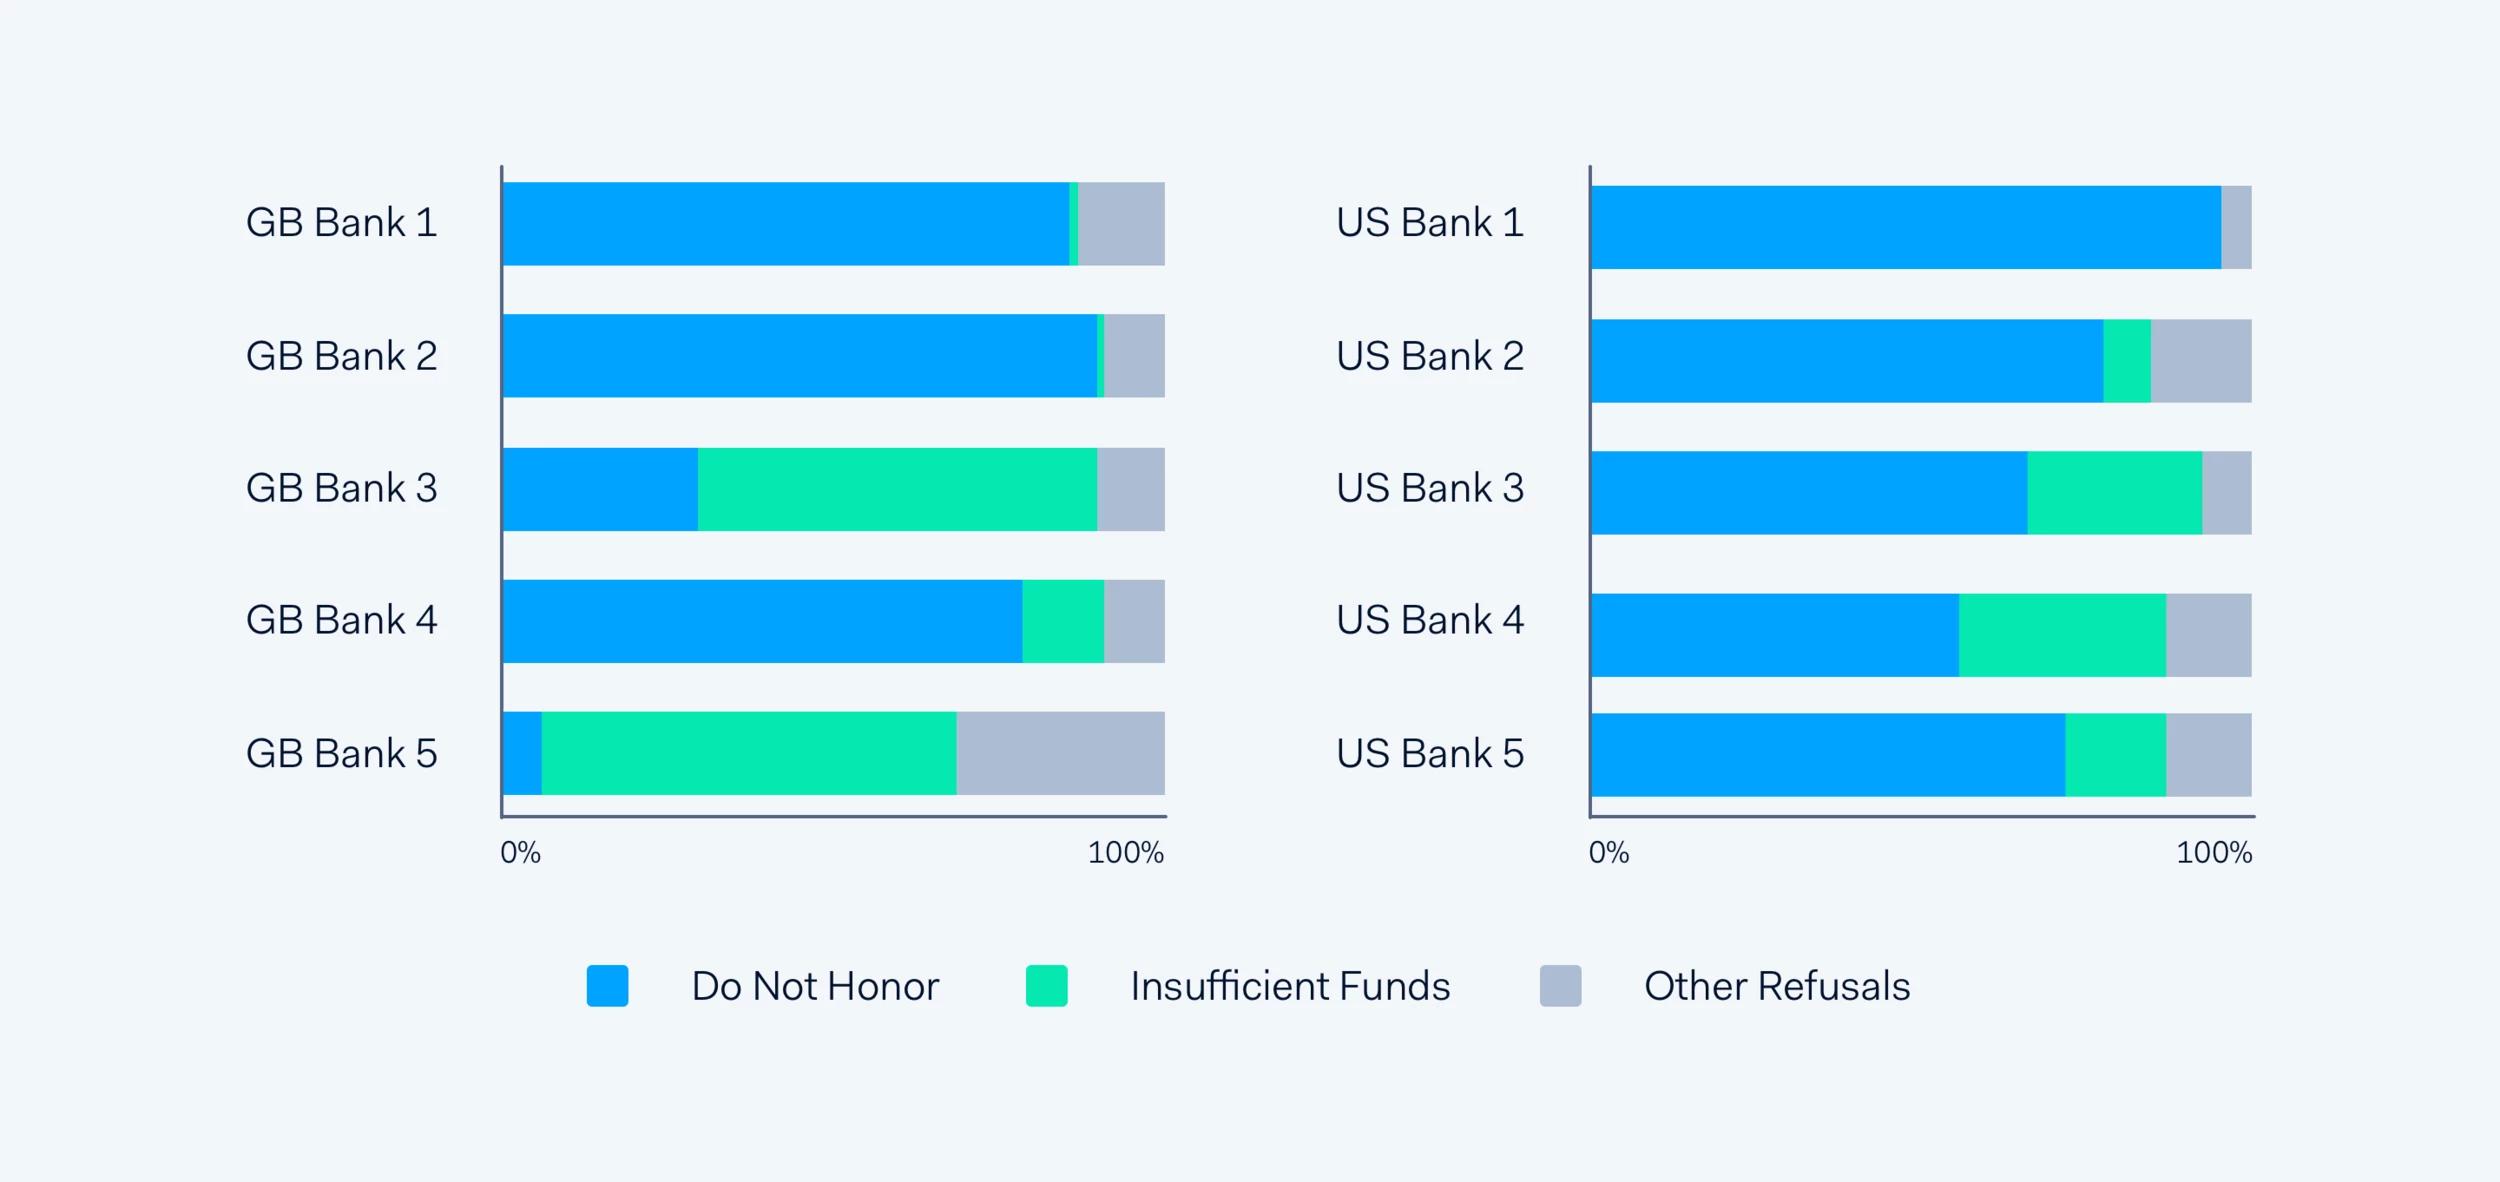 Breakdown of "Do Not Honor", "Insufficient Funds", and Other Refusals for 5 UK and US issuers